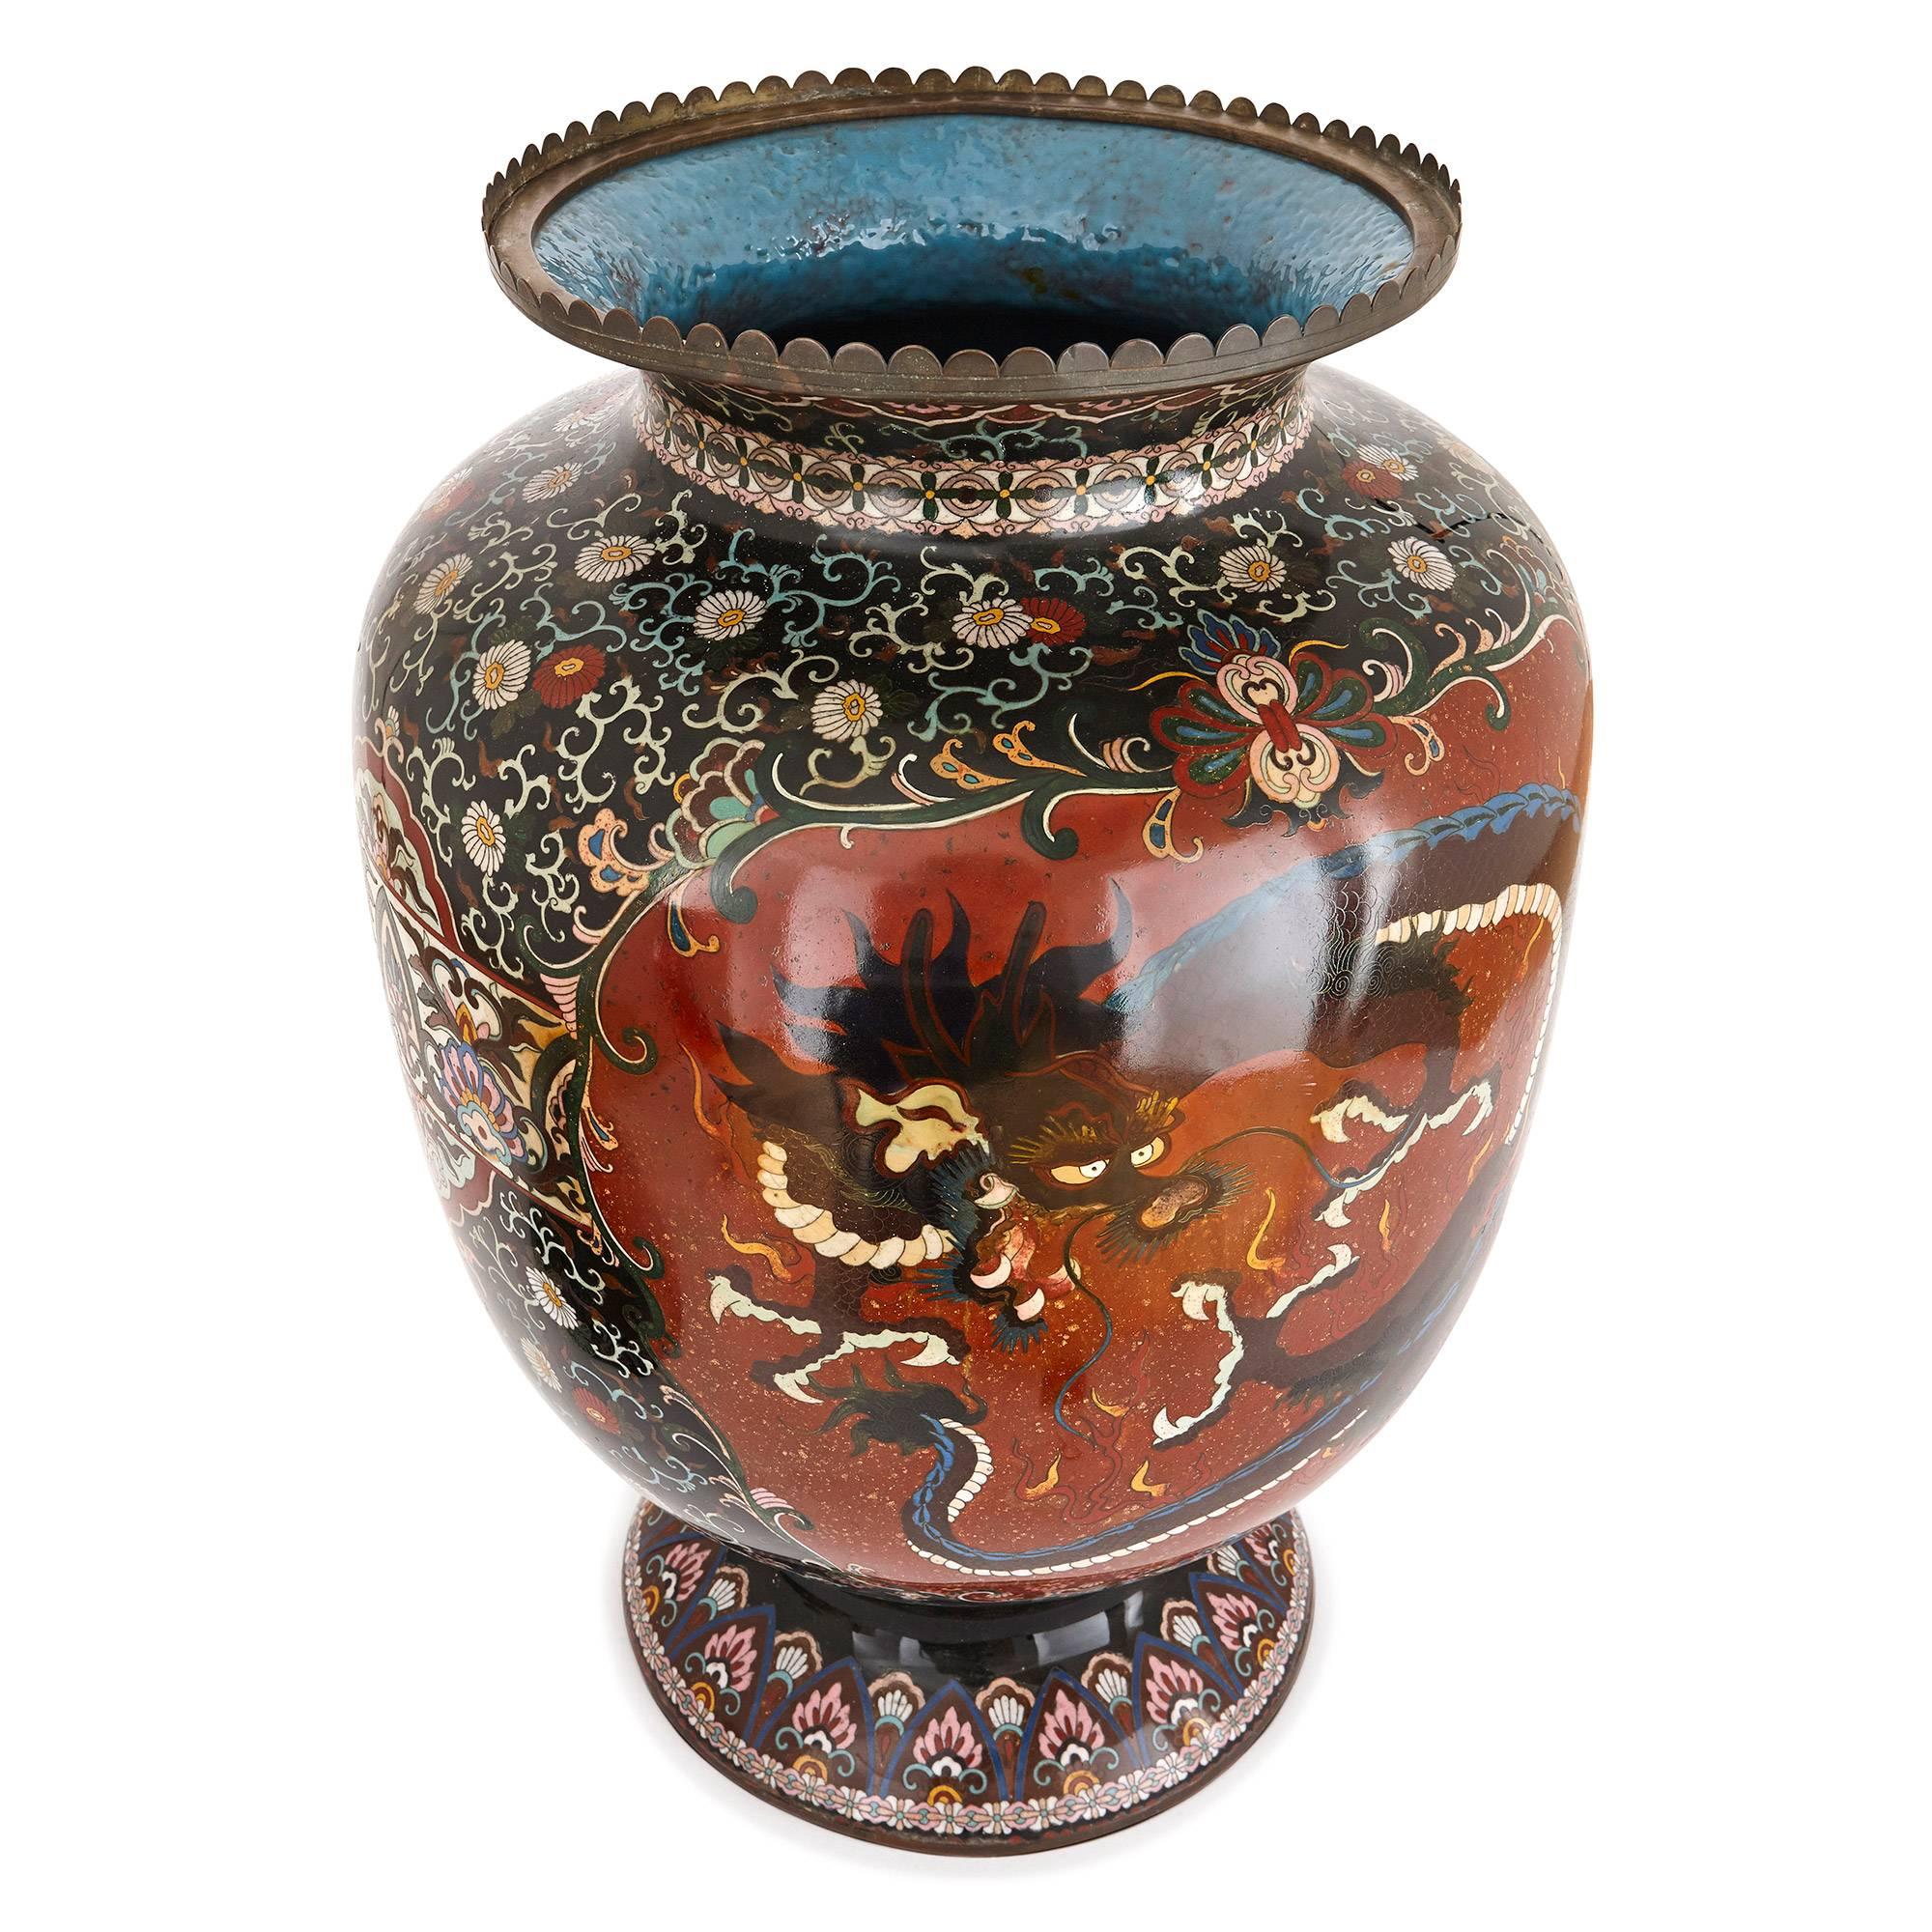 This intricately decorated antique Japanese vase was crafted in the Meiji period (1868-1912). The vase is of circular form and features a waisted base, large, ovoid body and a lid with a bun finial. The vase is decorated all over in the intricate